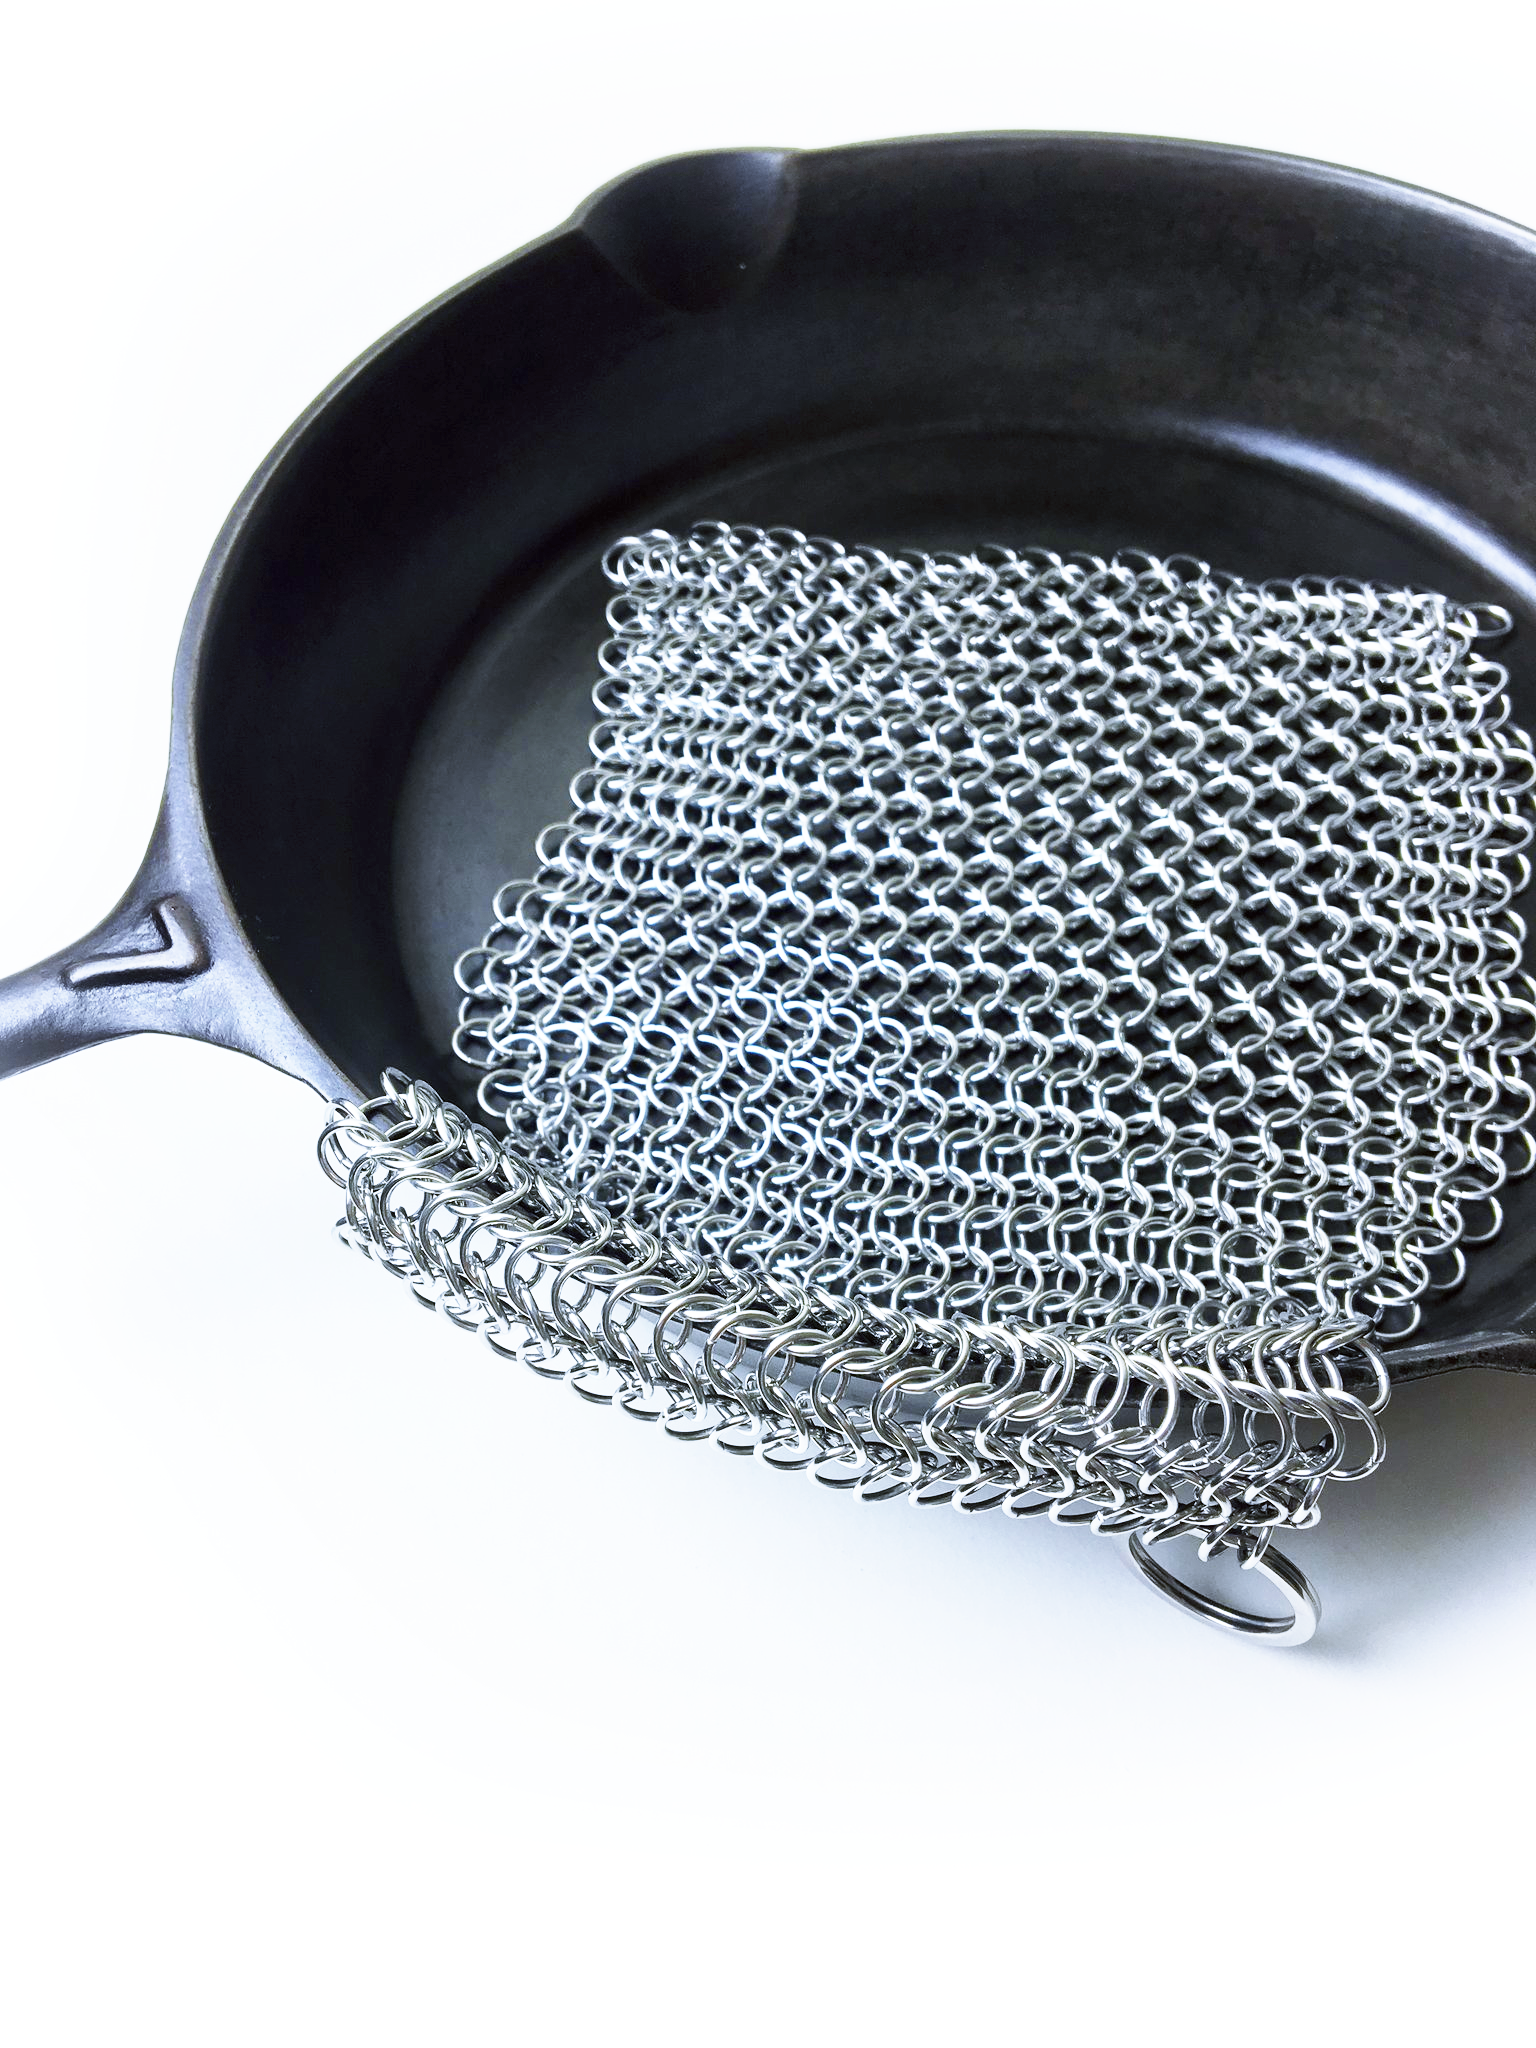 https://crisbee.org/cdn/shop/products/Chainmail_Display_with_Skillet_1_7a69055e-e5ee-488b-9767-5cb3c3268b42.png?v=1617338642&width=1946